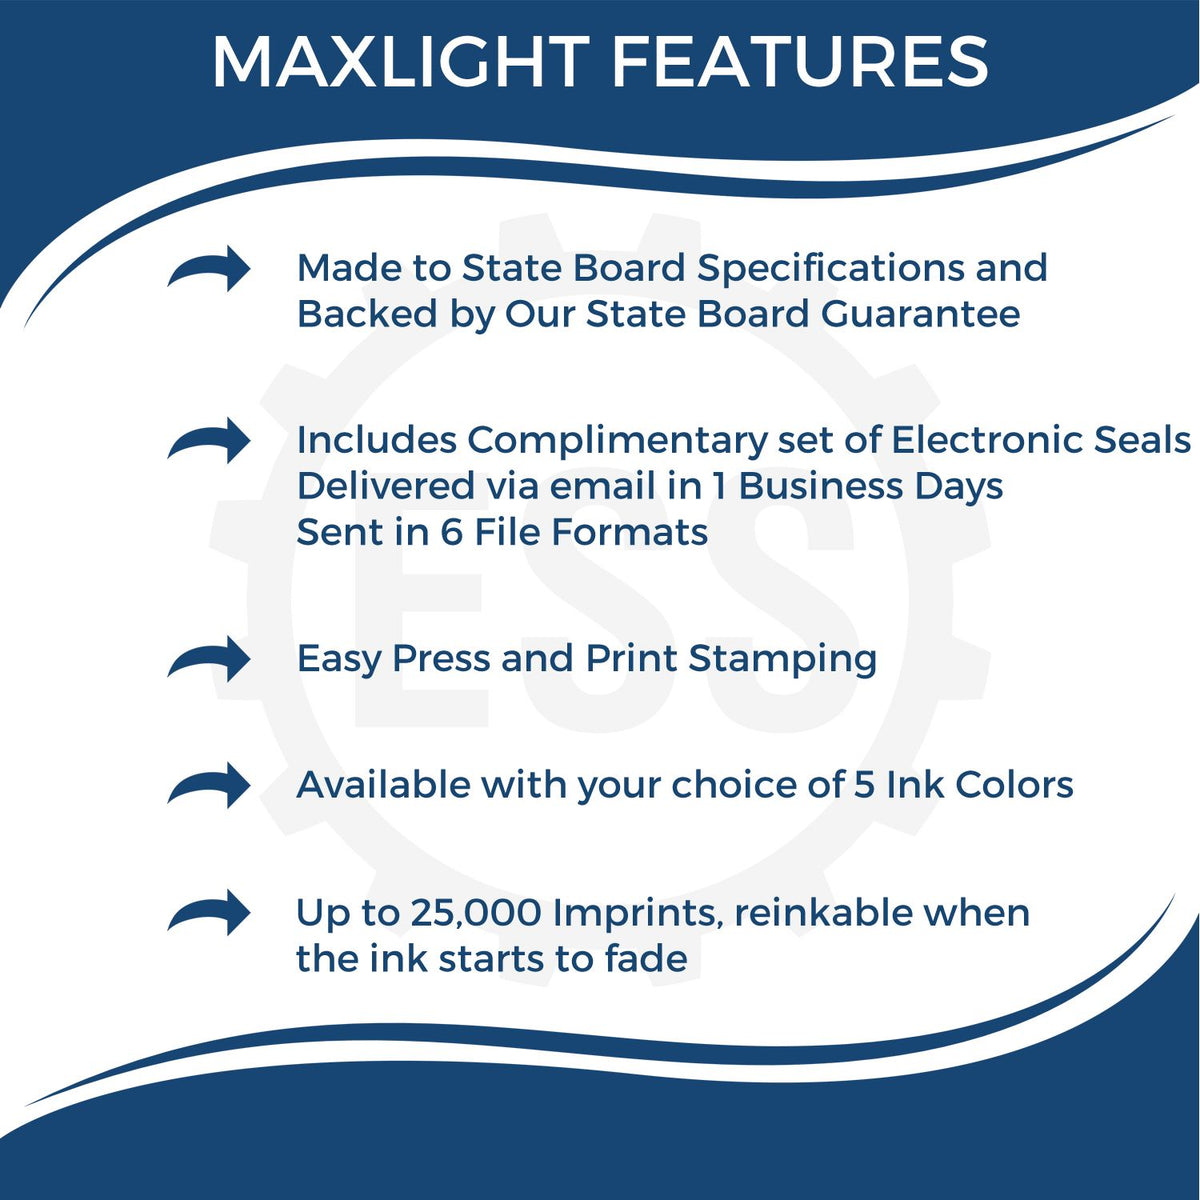 A picture of an infographic highlighting the selling points for the MaxLight Premium Pre-Inked California State Seal Notarial Stamp